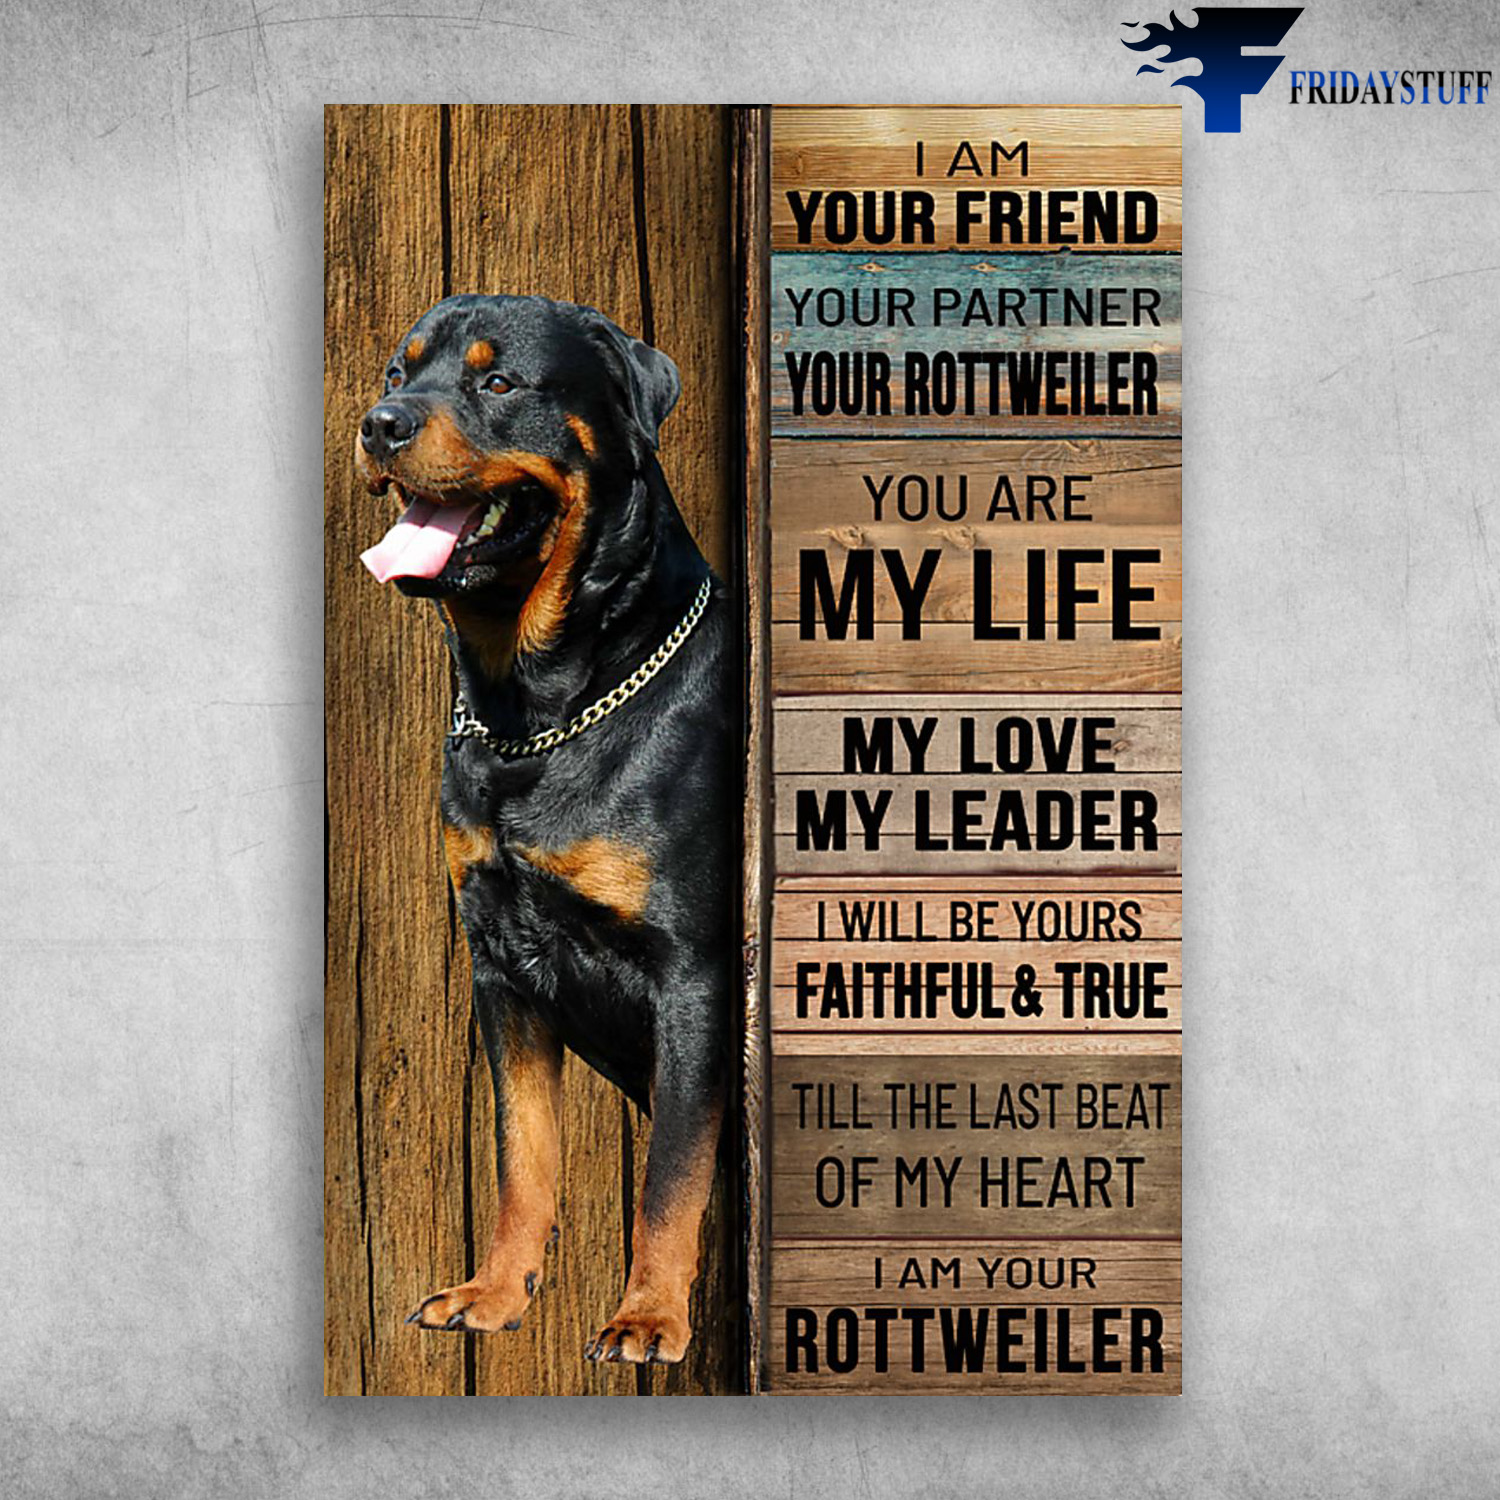 Rottweiler Dog - I Am Your Friend, Your Partner, Your Rottweiler, You Are My Life, My Love, My Leader, I Will Be Yours Faithful And True, Till The Last Beat Of My Heart, I Am Your Rottweiler